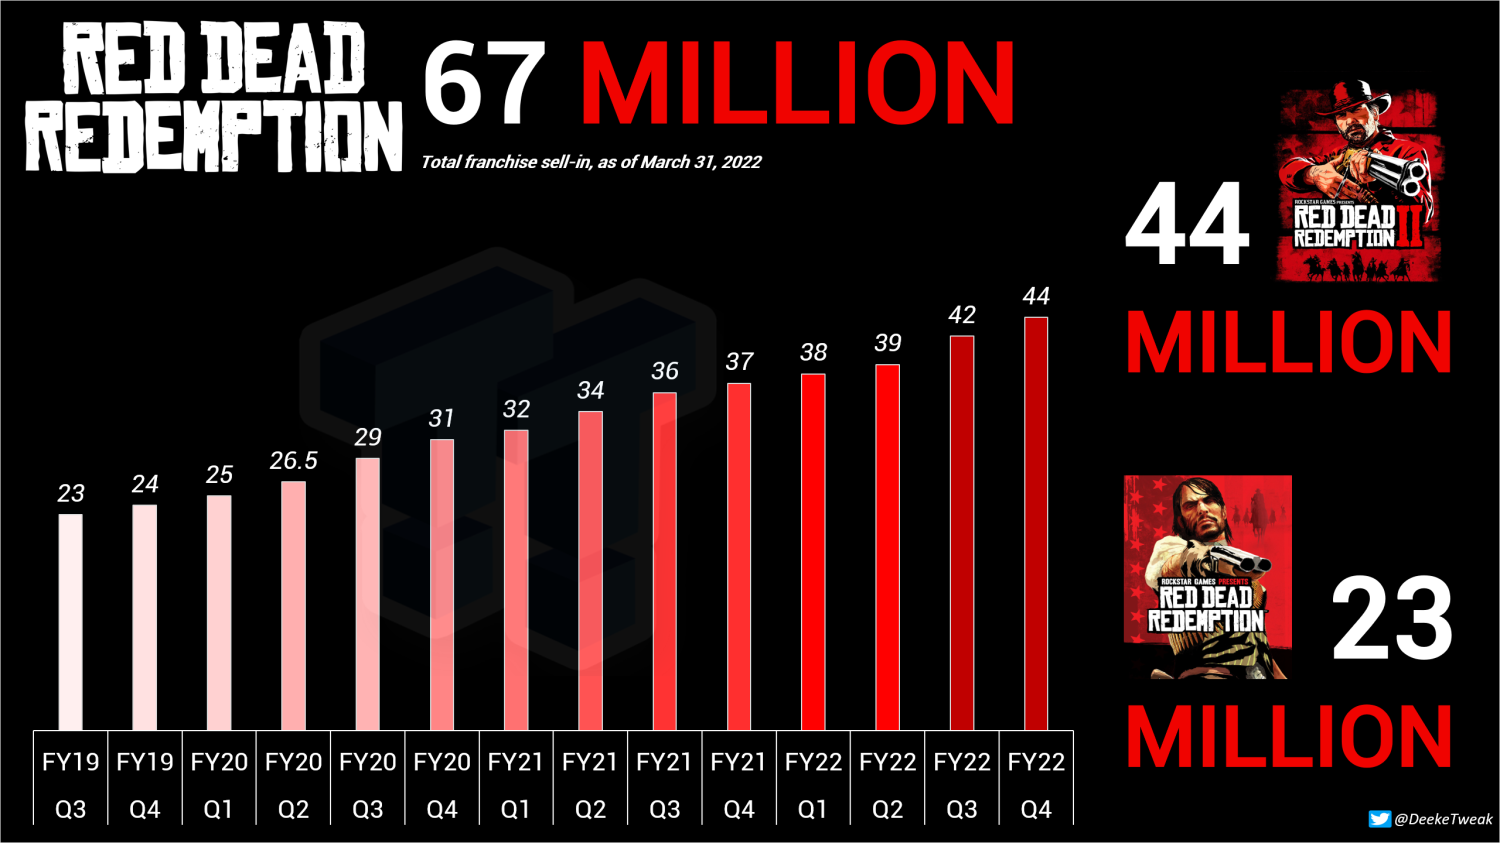 Turns into Pilgrim Galaxy Red Dead Redemption 2 hits 44 million sales, surprises Take-Two